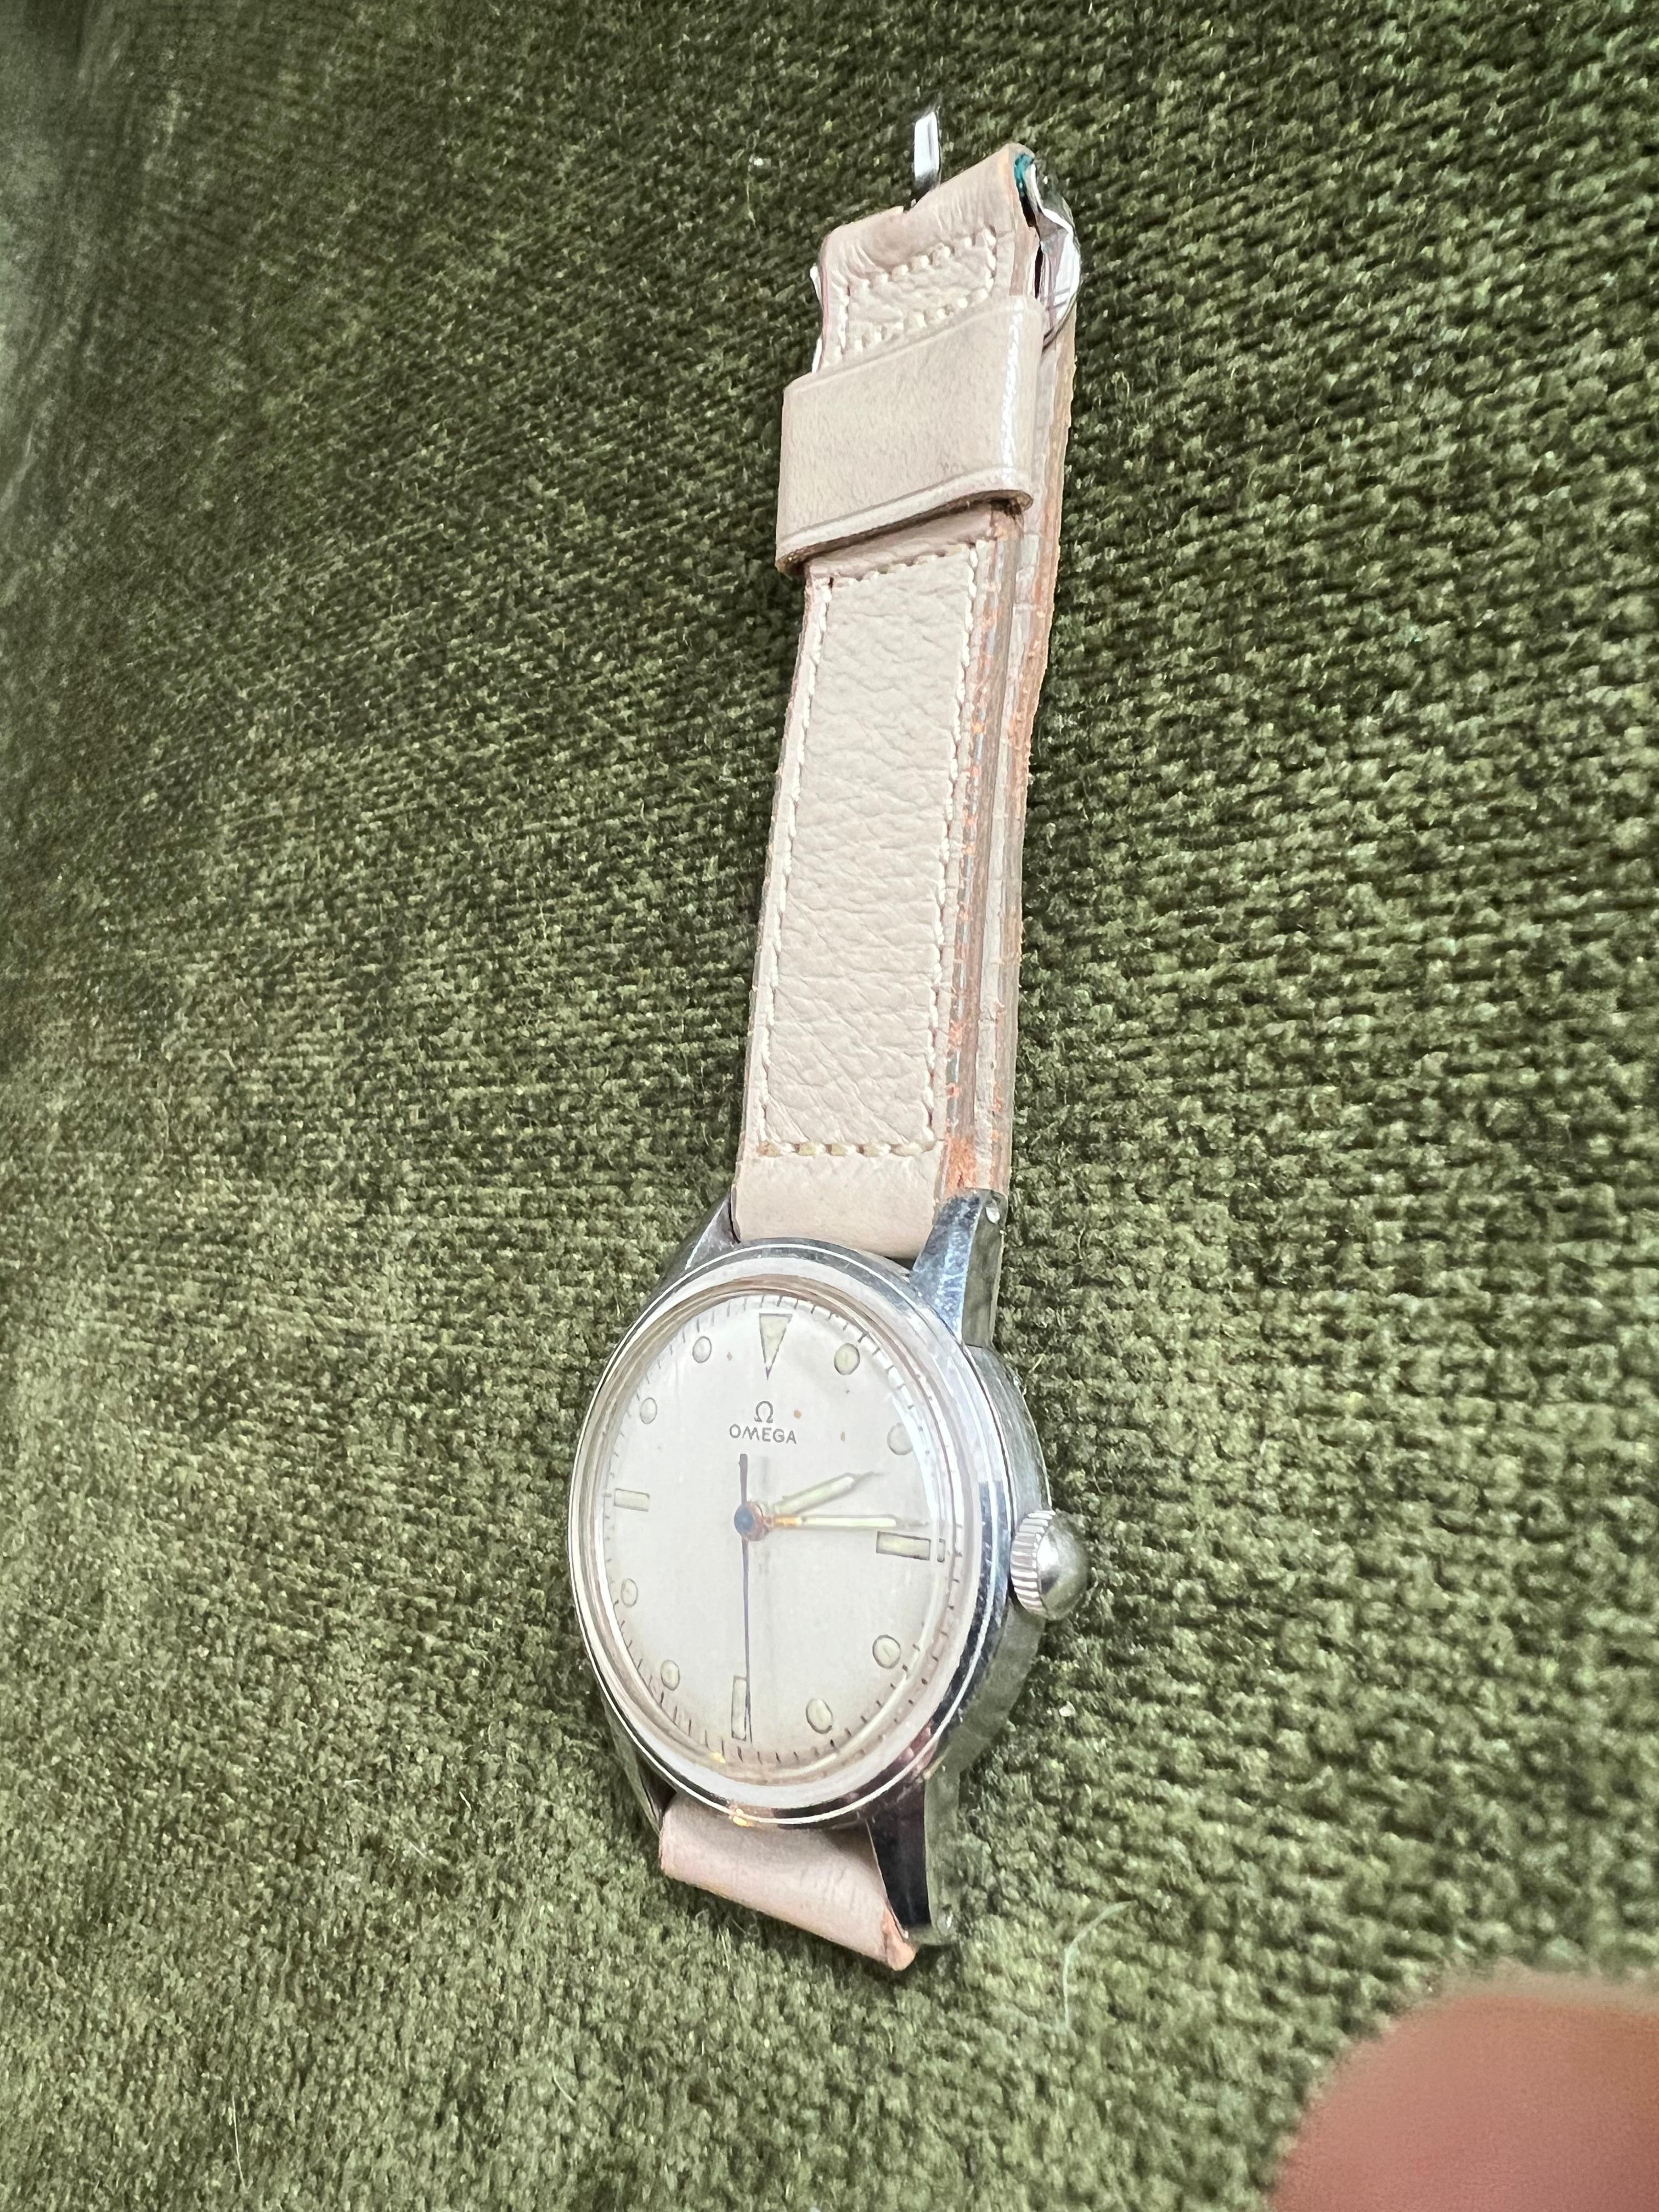 OMEGA Automatic Self-Winding Cal.501 Off White,  Leather Wristwatch, Circa 1960 In Good Condition For Sale In New York, NY